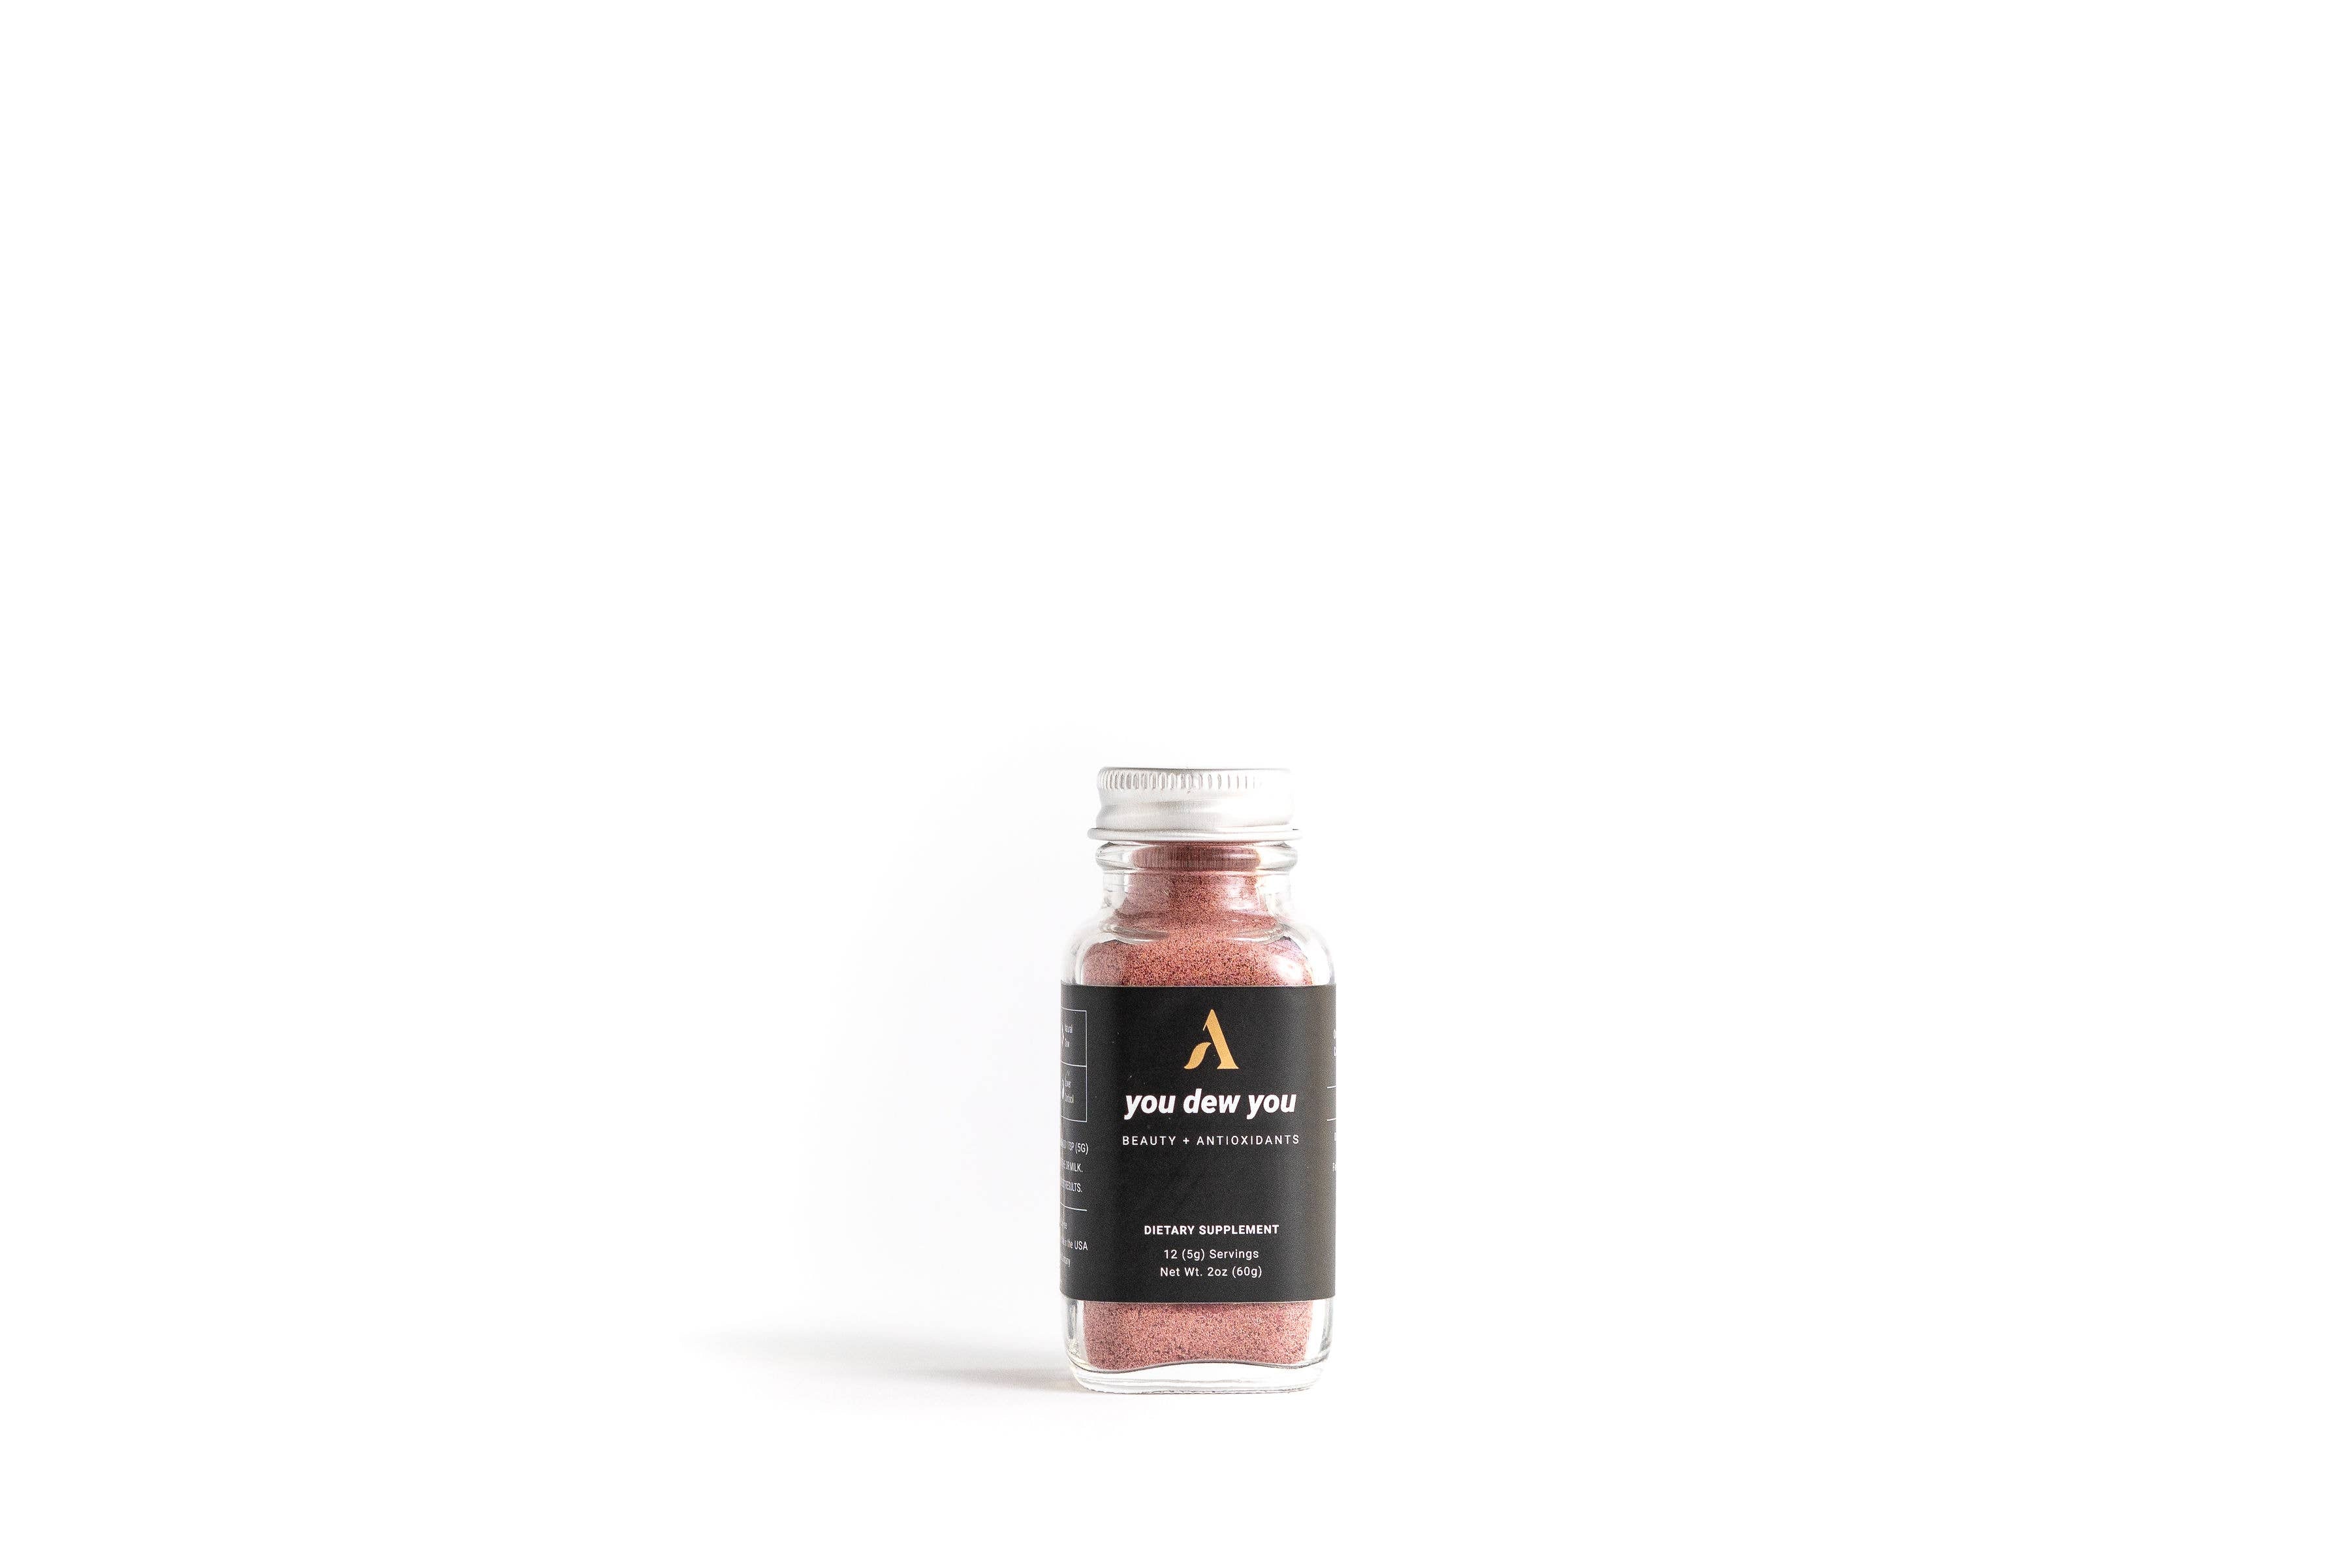 Apothékary - You Dew You... For Acne Clearing & Glowing Skin